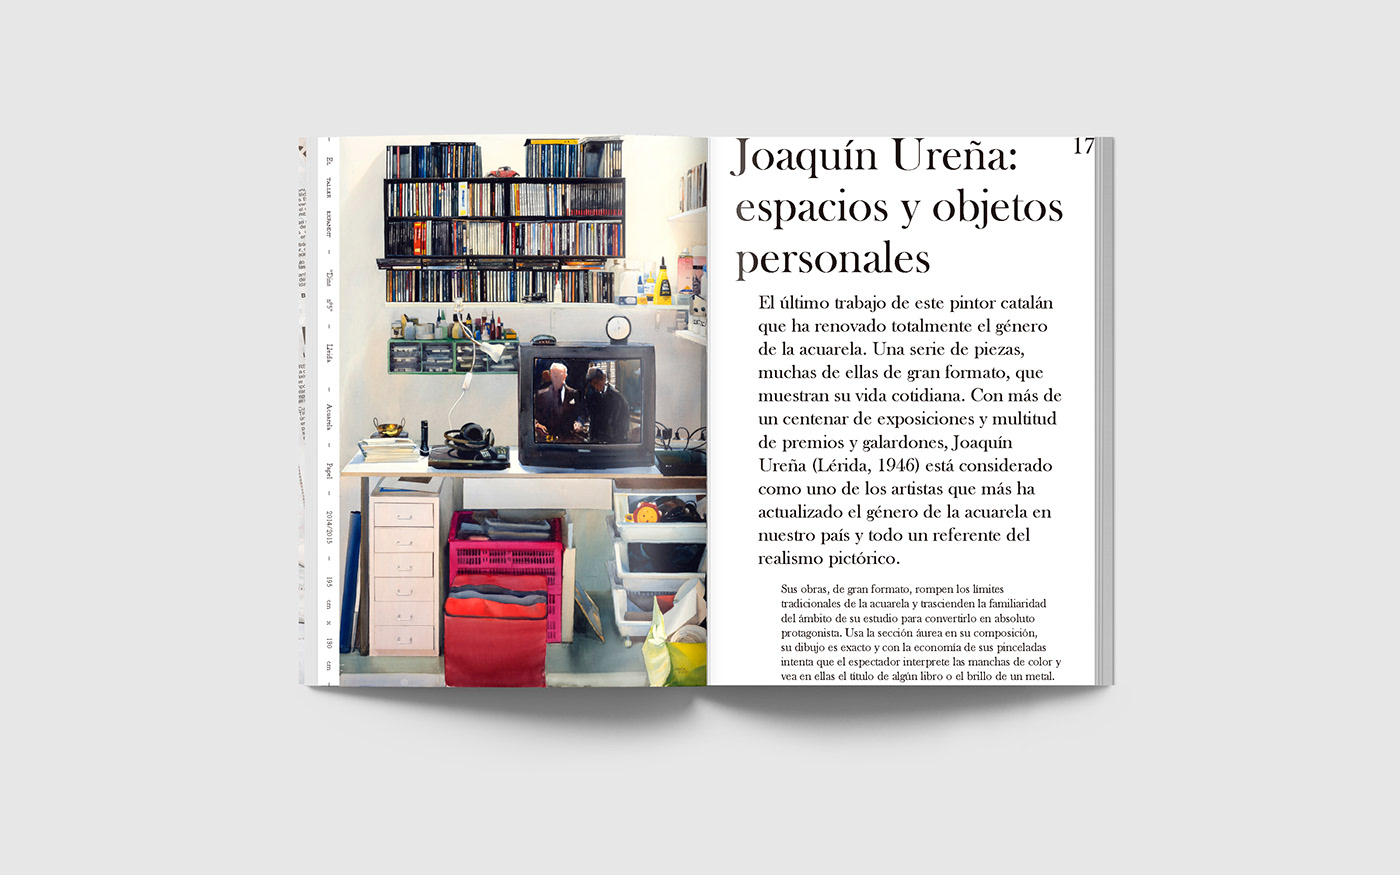 revista magazine issue Cotidianidad everyday life masculinidad masculinity concept LIMITE independiente